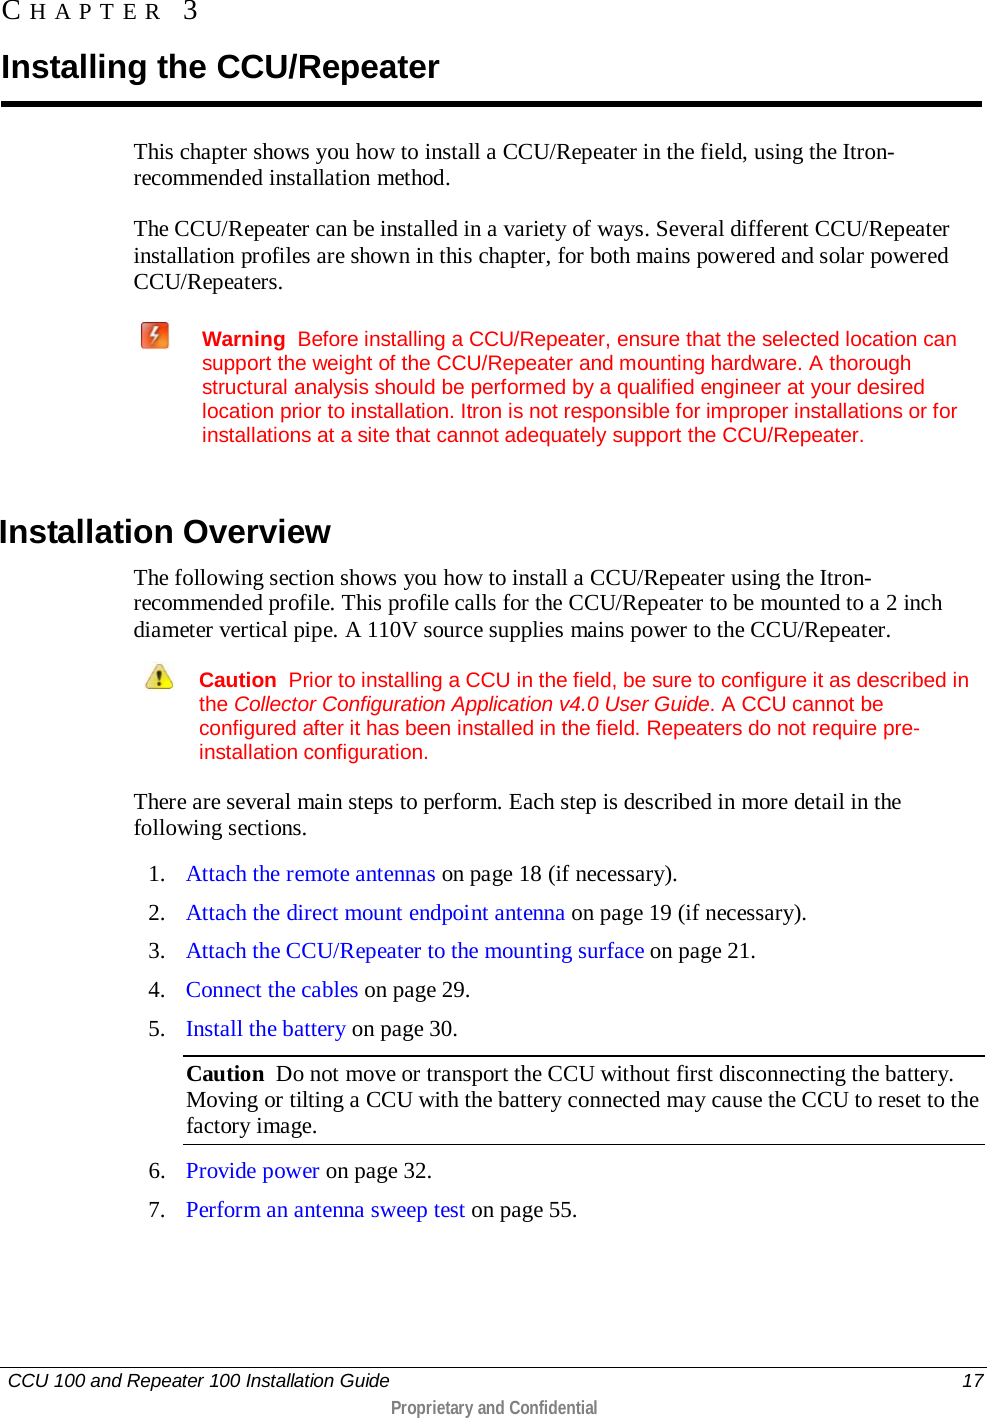   CCU 100 and Repeater 100 Installation Guide    17  Proprietary and Confidential  This chapter shows you how to install a CCU/Repeater in the field, using the Itron-recommended installation method.  The CCU/Repeater can be installed in a variety of ways. Several different CCU/Repeater installation profiles are shown in this chapter, for both mains powered and solar powered CCU/Repeaters.   Warning  Before installing a CCU/Repeater, ensure that the selected location can support the weight of the CCU/Repeater and mounting hardware. A thorough structural analysis should be performed by a qualified engineer at your desired location prior to installation. Itron is not responsible for improper installations or for installations at a site that cannot adequately support the CCU/Repeater.     Installation Overview The following section shows you how to install a CCU/Repeater using the Itron-recommended profile. This profile calls for the CCU/Repeater to be mounted to a 2 inch diameter vertical pipe. A 110V source supplies mains power to the CCU/Repeater.   Caution  Prior to installing a CCU in the field, be sure to configure it as described in the Collector Configuration Application v4.0 User Guide. A CCU cannot be configured after it has been installed in the field. Repeaters do not require pre-installation configuration. There are several main steps to perform. Each step is described in more detail in the following sections.  1. Attach the remote antennas on page 18 (if necessary). 2. Attach the direct mount endpoint antenna on page 19 (if necessary). 3. Attach the CCU/Repeater to the mounting surface on page 21. 4. Connect the cables on page 29. 5. Install the battery on page 30. Caution  Do not move or transport the CCU without first disconnecting the battery.  Moving or tilting a CCU with the battery connected may cause the CCU to reset to the factory image. 6. Provide power on page 32. 7. Perform an antenna sweep test on page 55.  CHAPTER 3  Installing the CCU/Repeater 